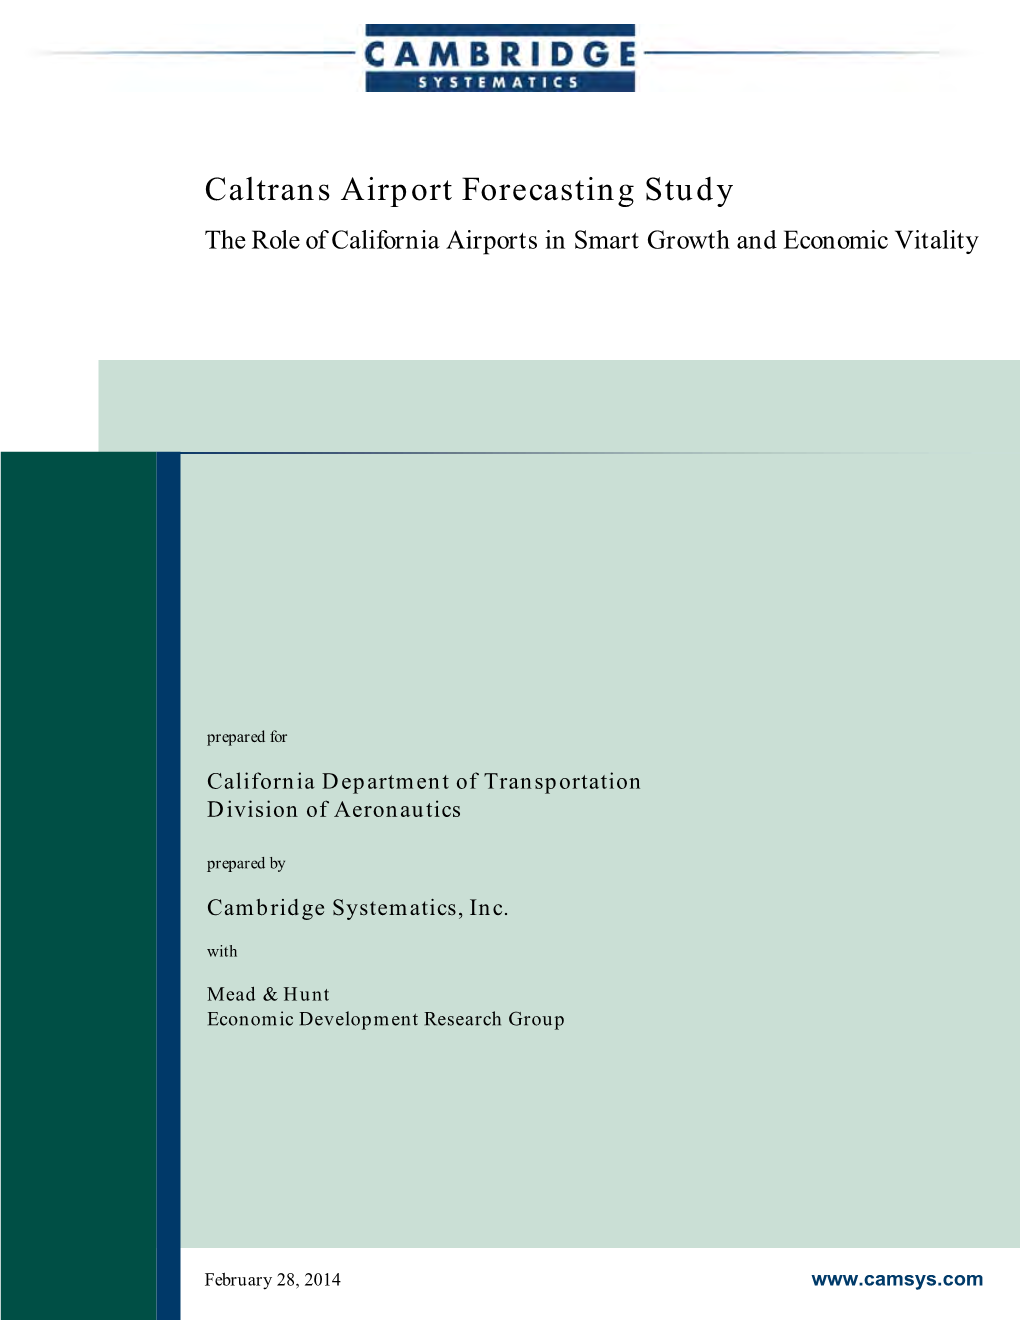 Caltrans Airport Forecasting Study the Role of California Airports in Smart Growth and Economic Vitality